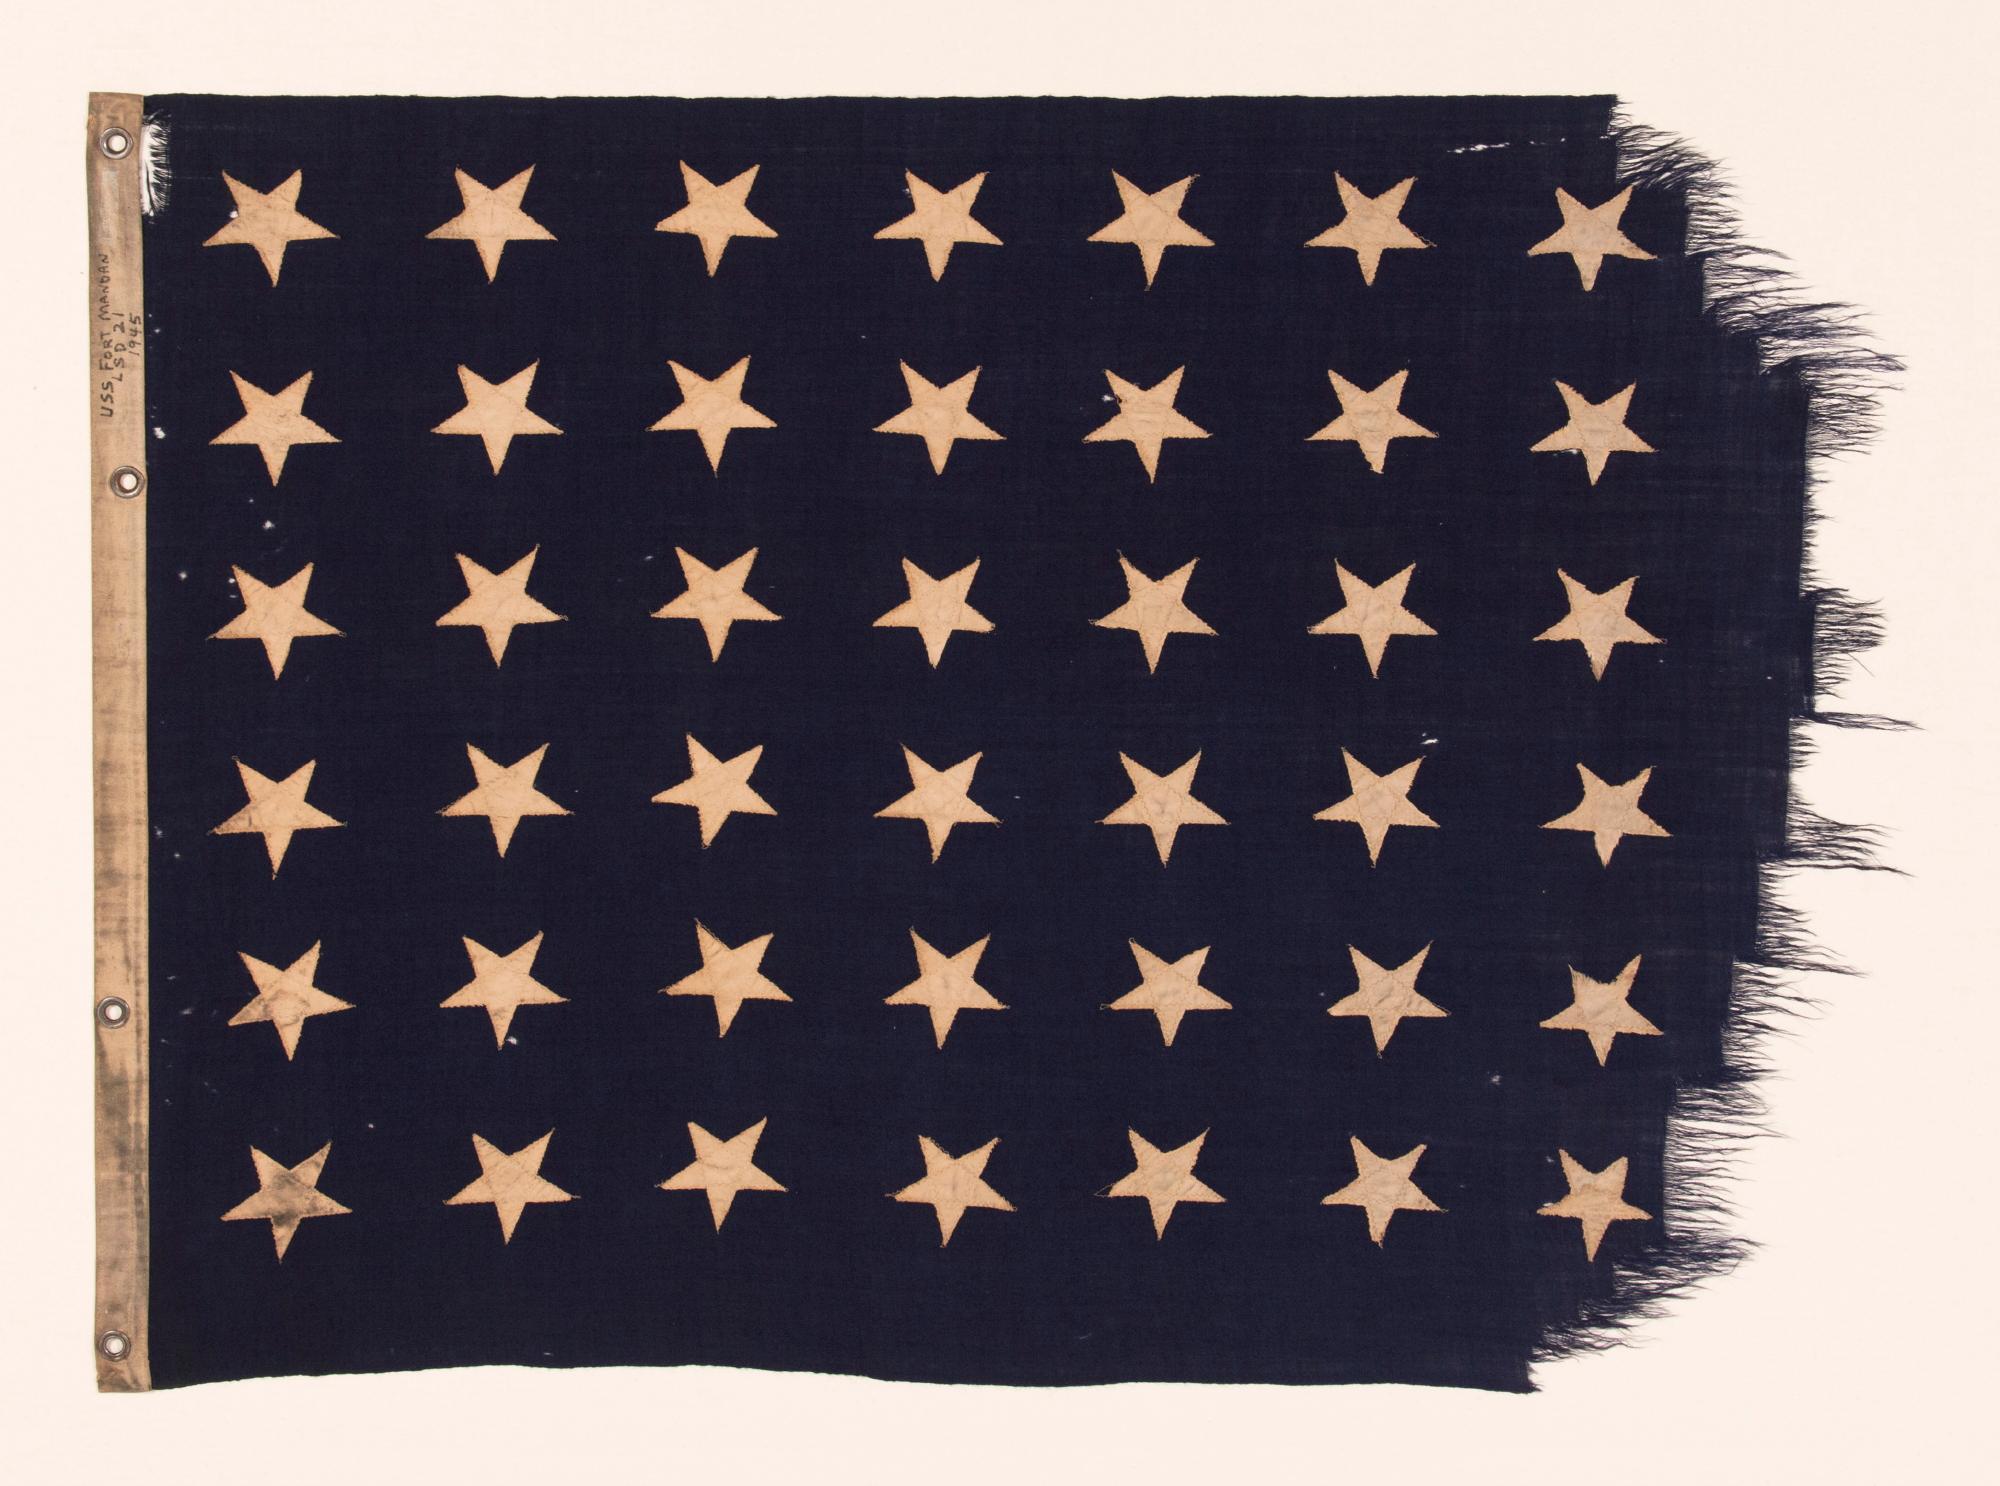 48 STAR U.S. NAVY JACK, MARKED AS HAVING BEEN FLOWN ON THE U.S.S. FT. MANDAN, LAUNCHED NEAR THE END OF WWII, IN 1945, WITH SERVICE DURING BOTH THE KOREAN AND VIETNAM WAR ERAS, IN THE ARCTIC, AT THE NORTH POLE, AND AT GUANTANAMO BAY DURING THE CUBAN